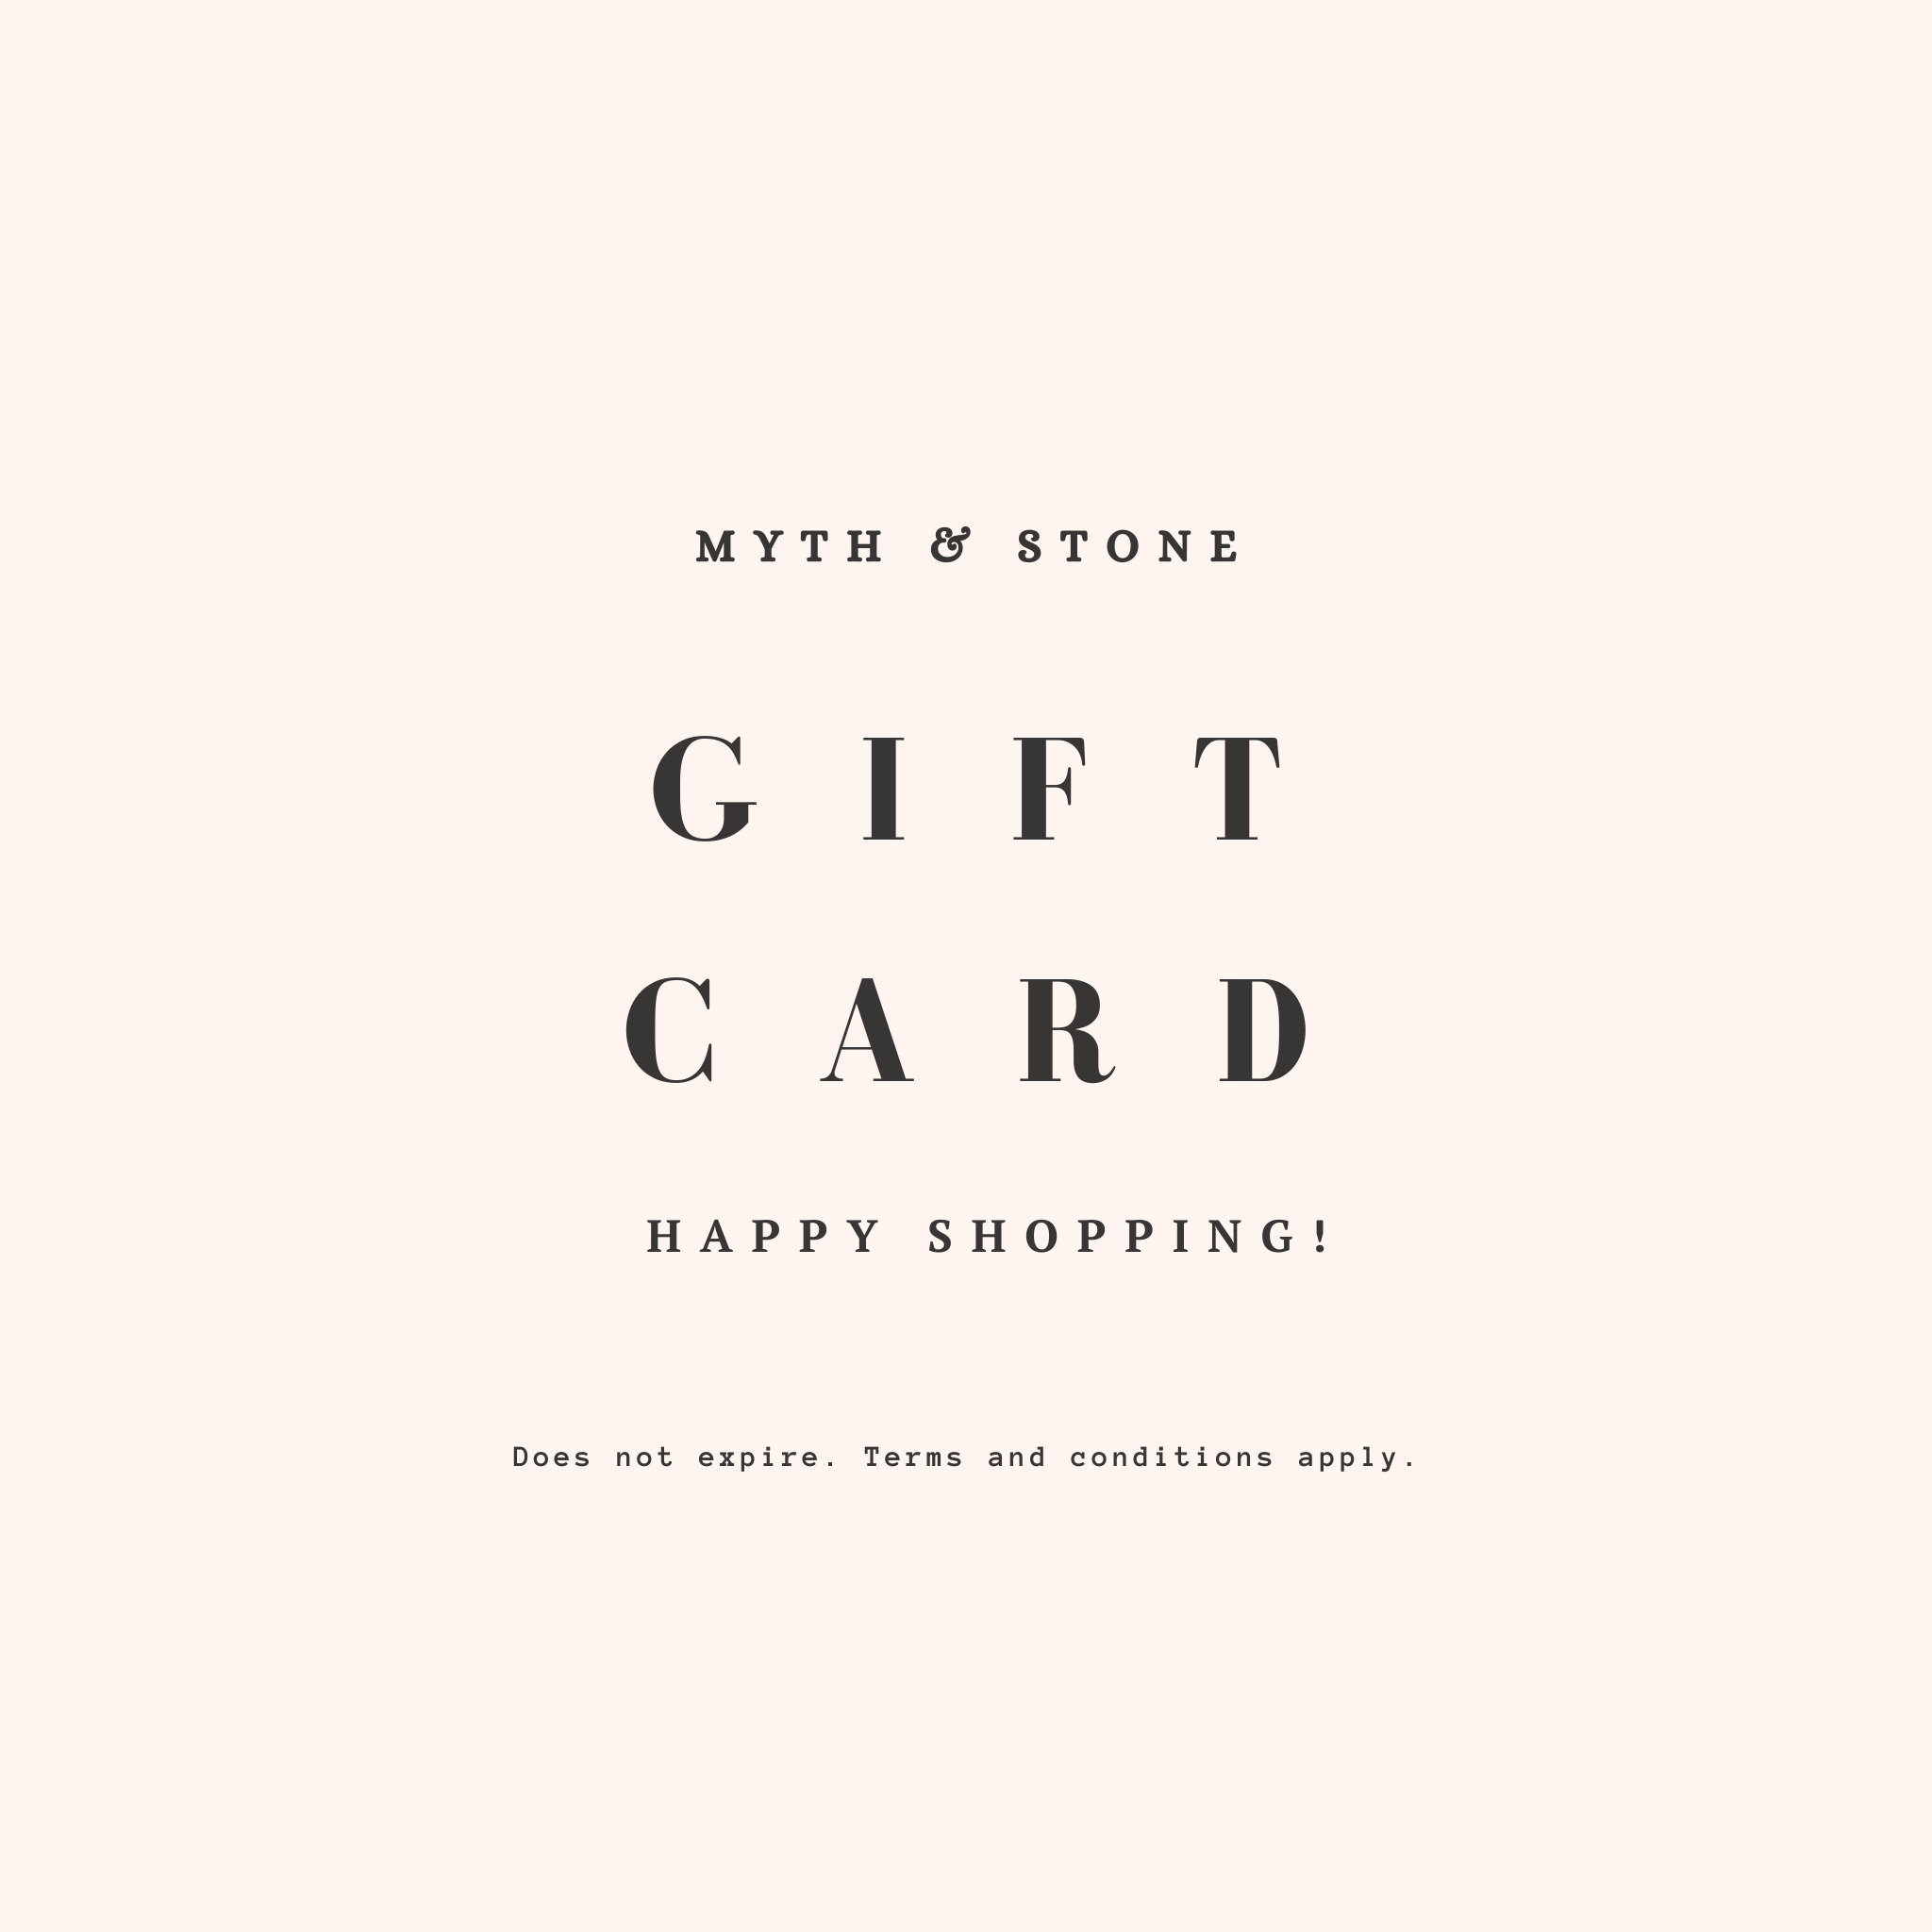 Myth and Stone Gift Card Happy Shopping